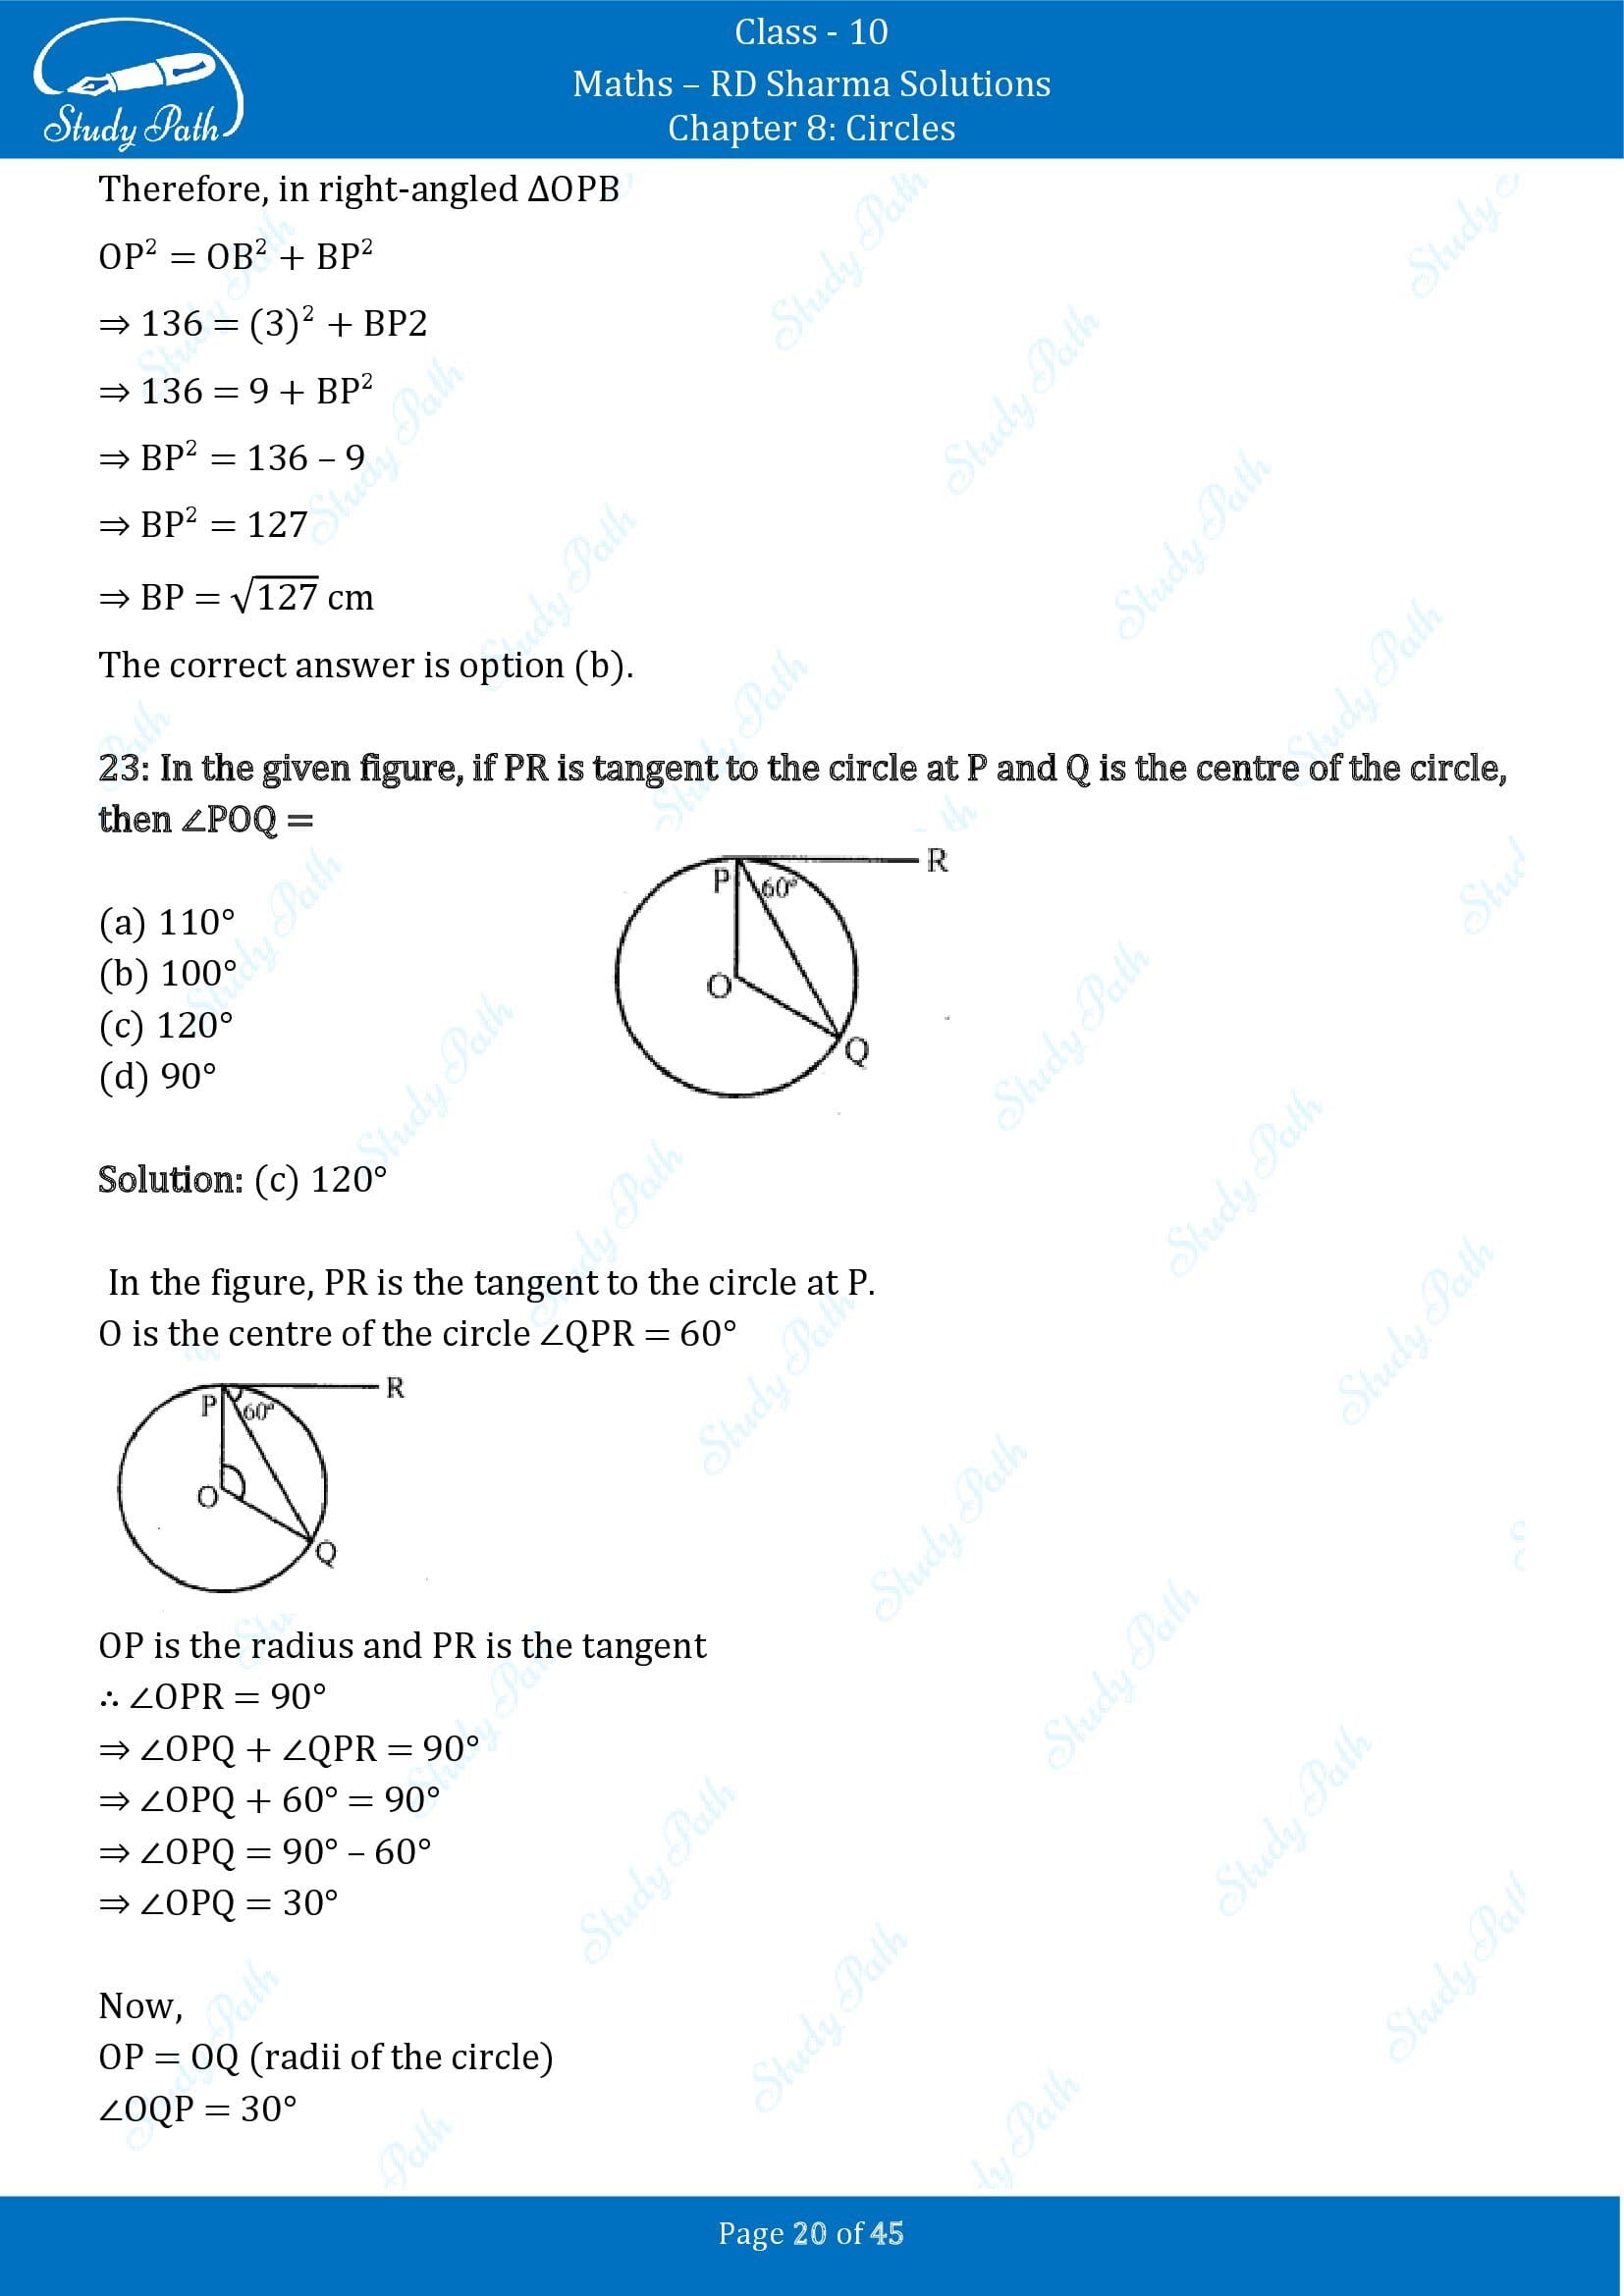 RD Sharma Solutions Class 10 Chapter 8 Circles Multiple Choice Questions MCQs 00020